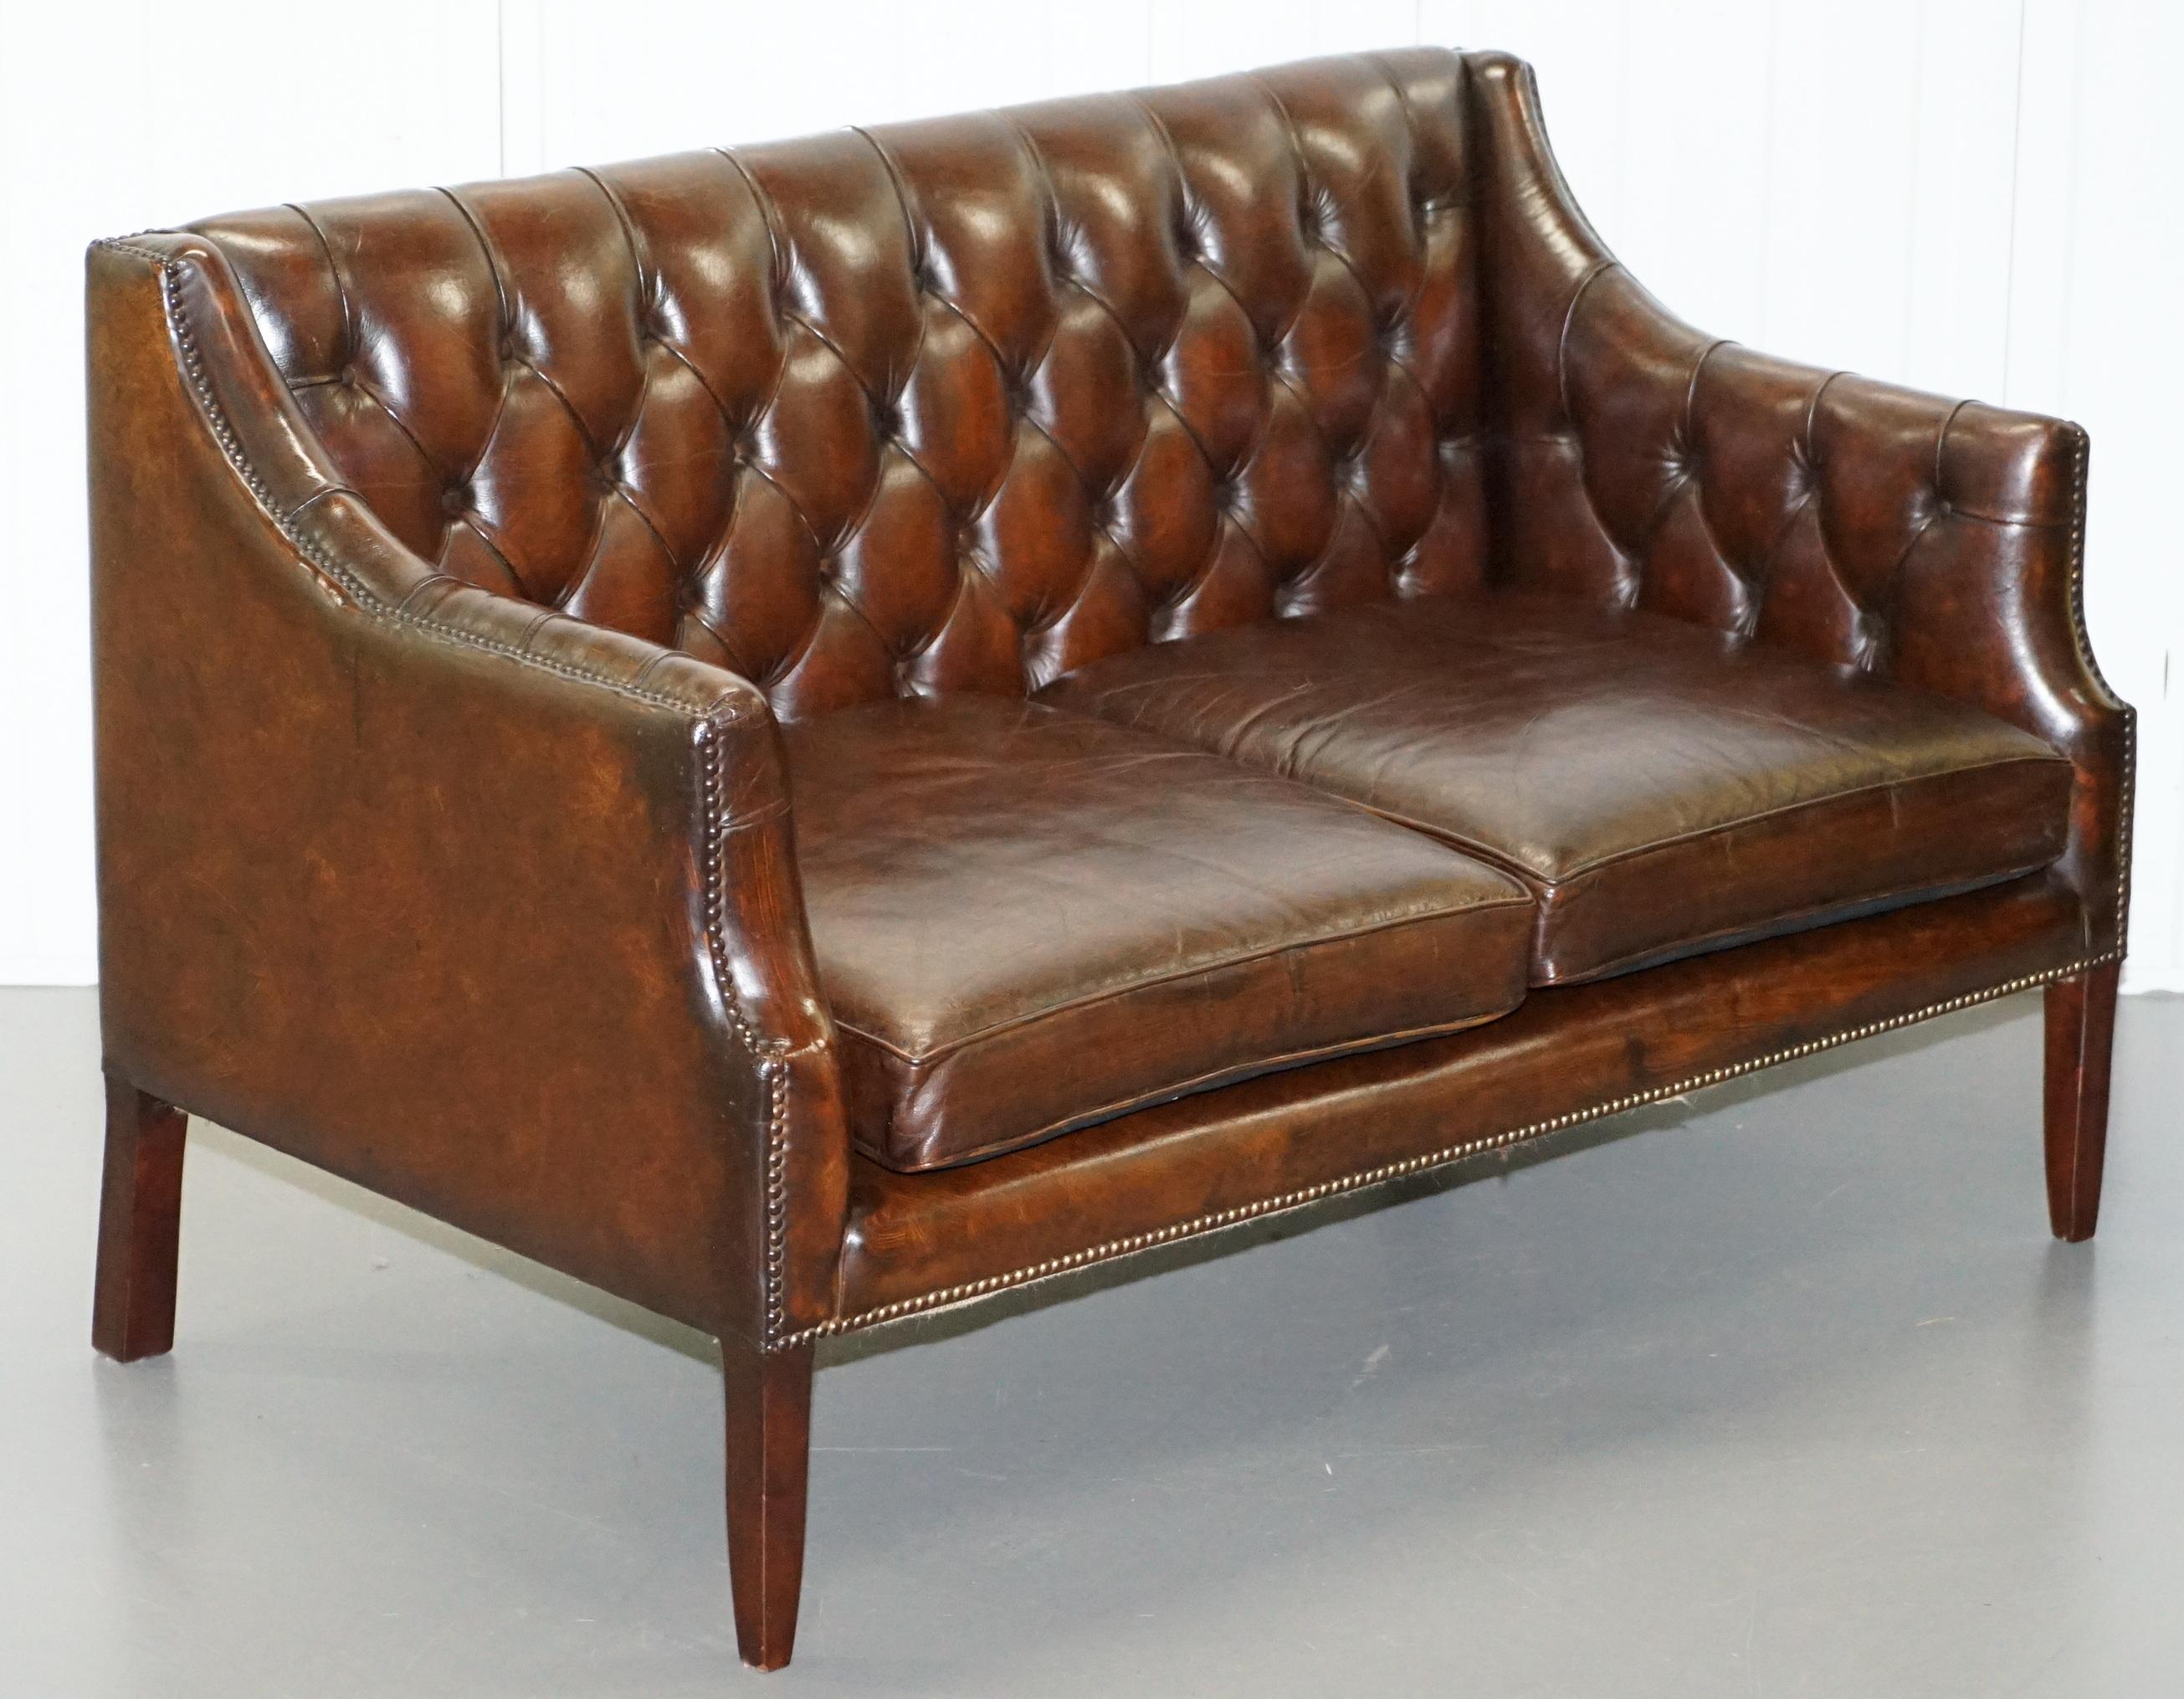 We are delighted to this very rare mid century Lutyen’s Viceroy style Chesterfield hand dyed cigar brown leather sofa

A very rare model sofa, originally made by Lutyen’s in the latter part of the Victorian era, the family still make the chair